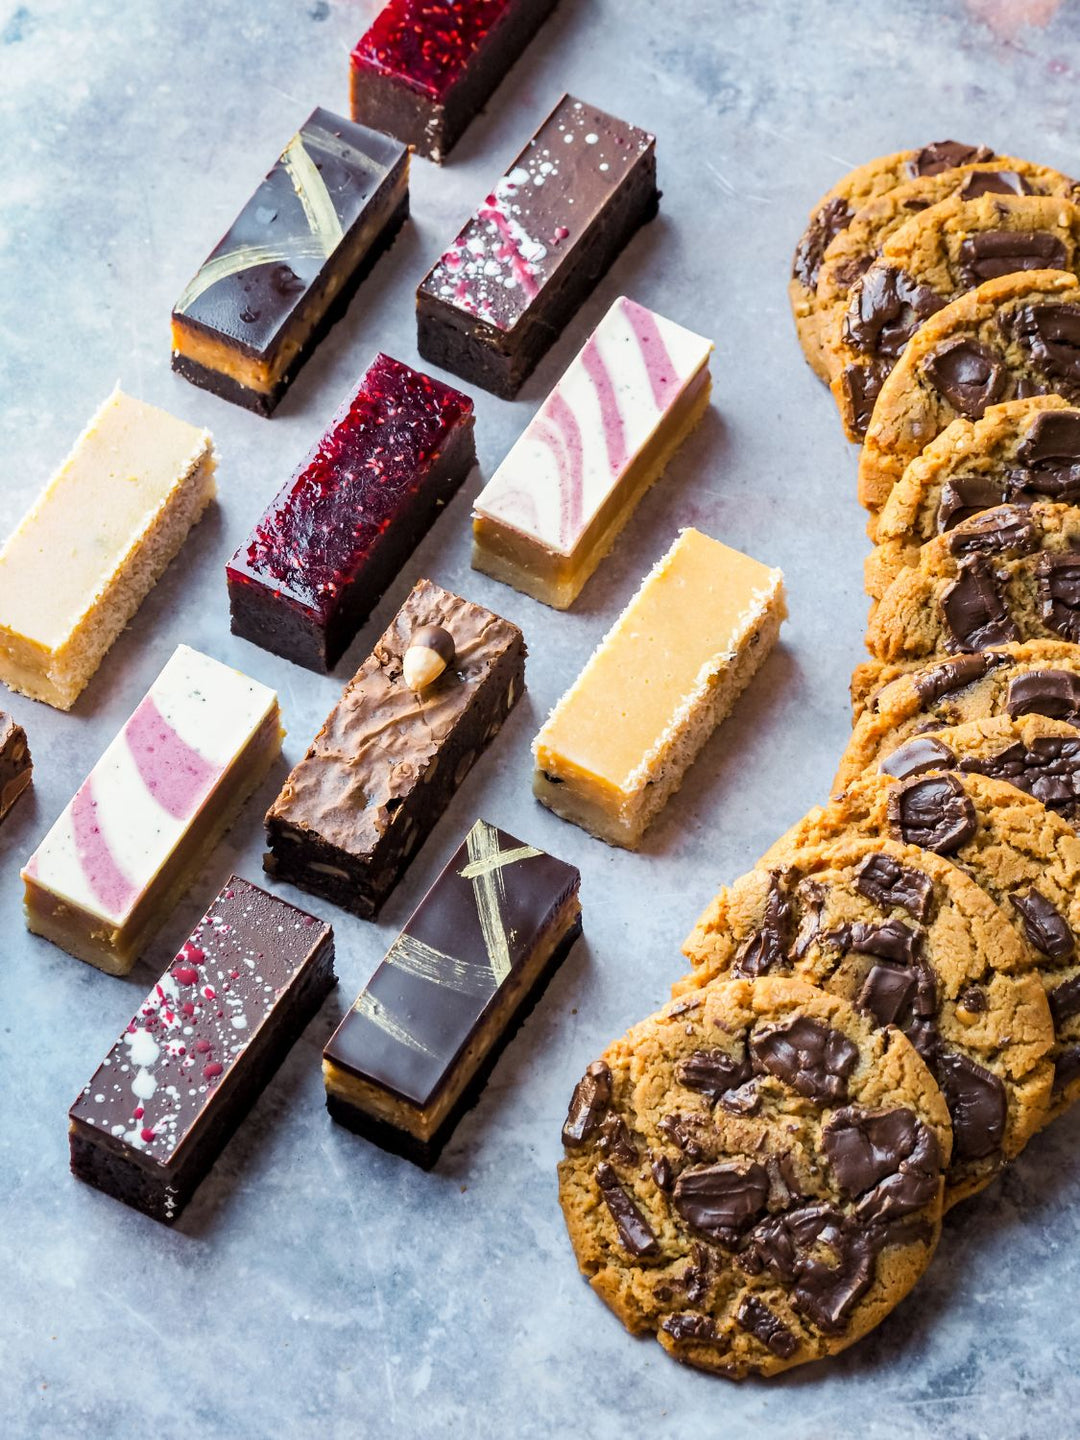 Mafia Family Pack Assorted Gluten Free Dessert Bars and Cookies Gluten Free Bakery Melbourne Northcote Shop Melbourne Delivery Regional Victoria Deliveries